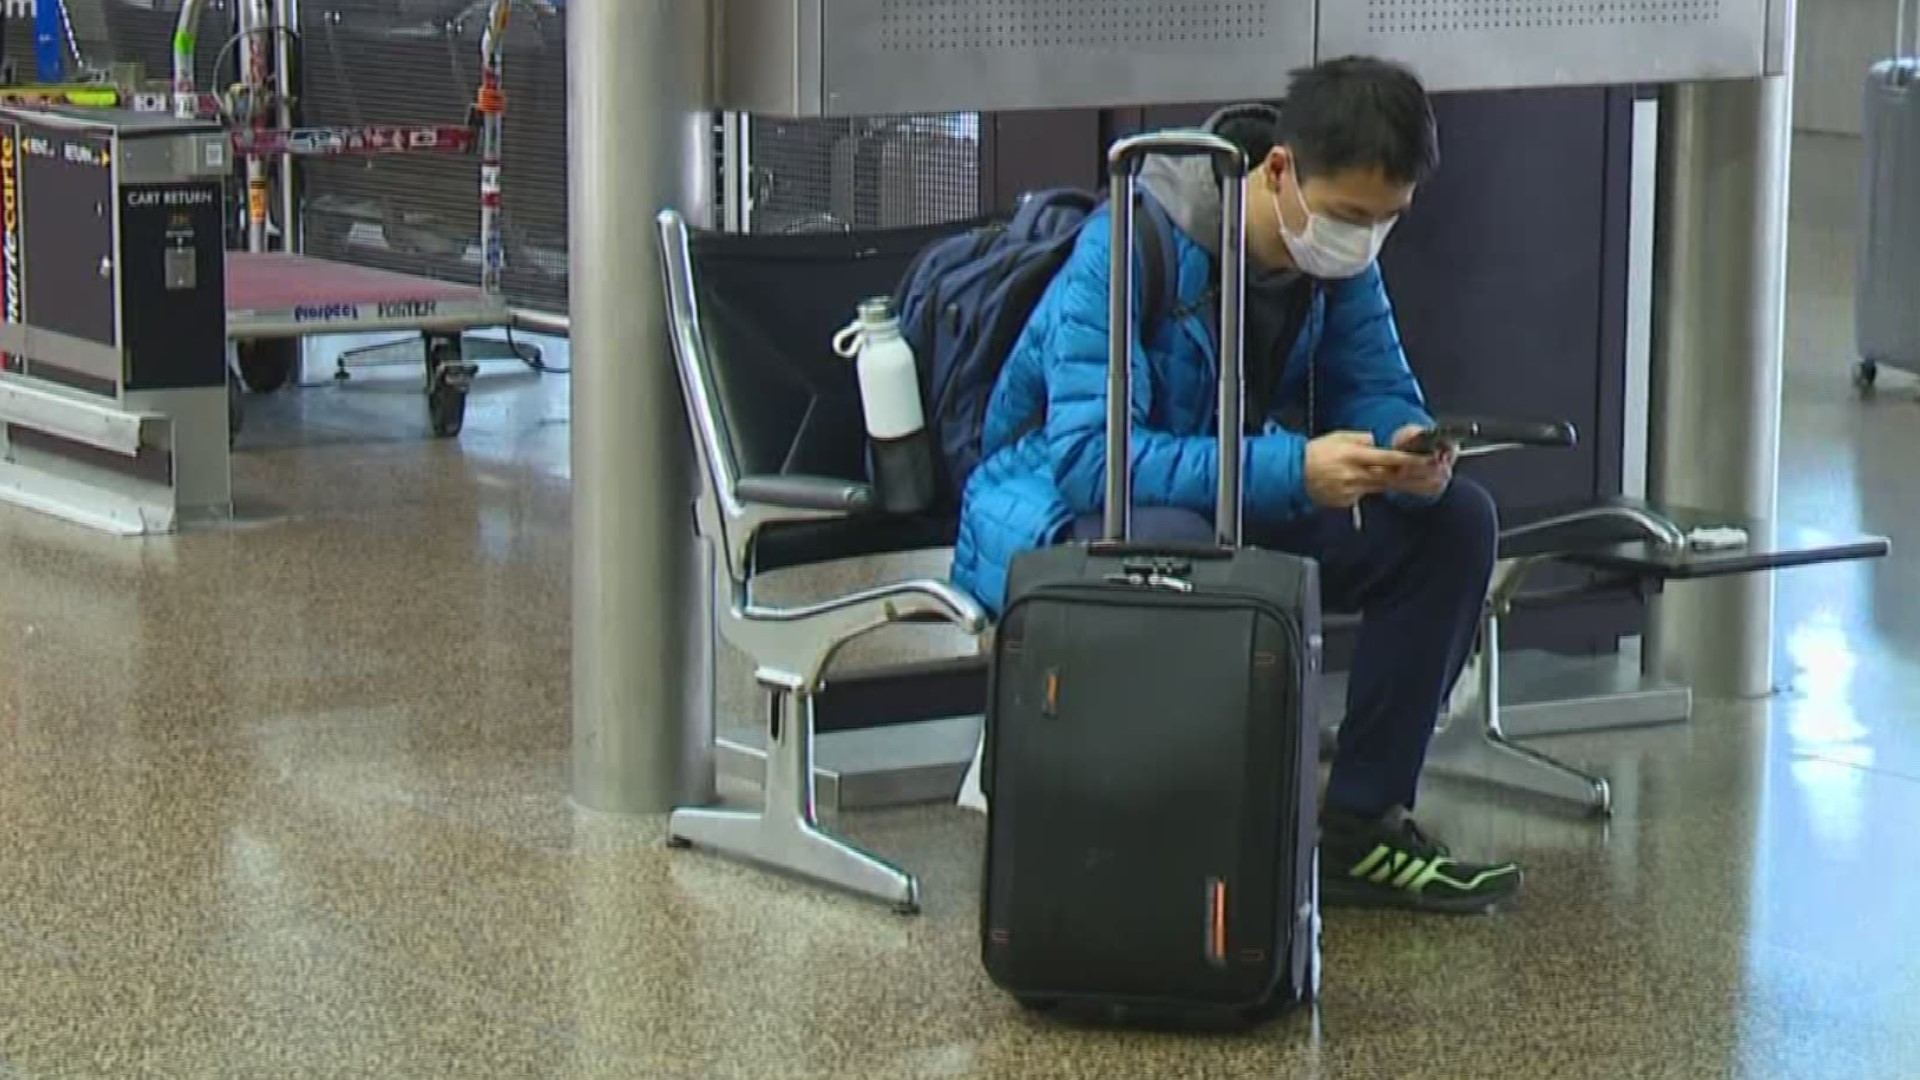 Sea-Tac is one of seven airports that will screen travellers from China.